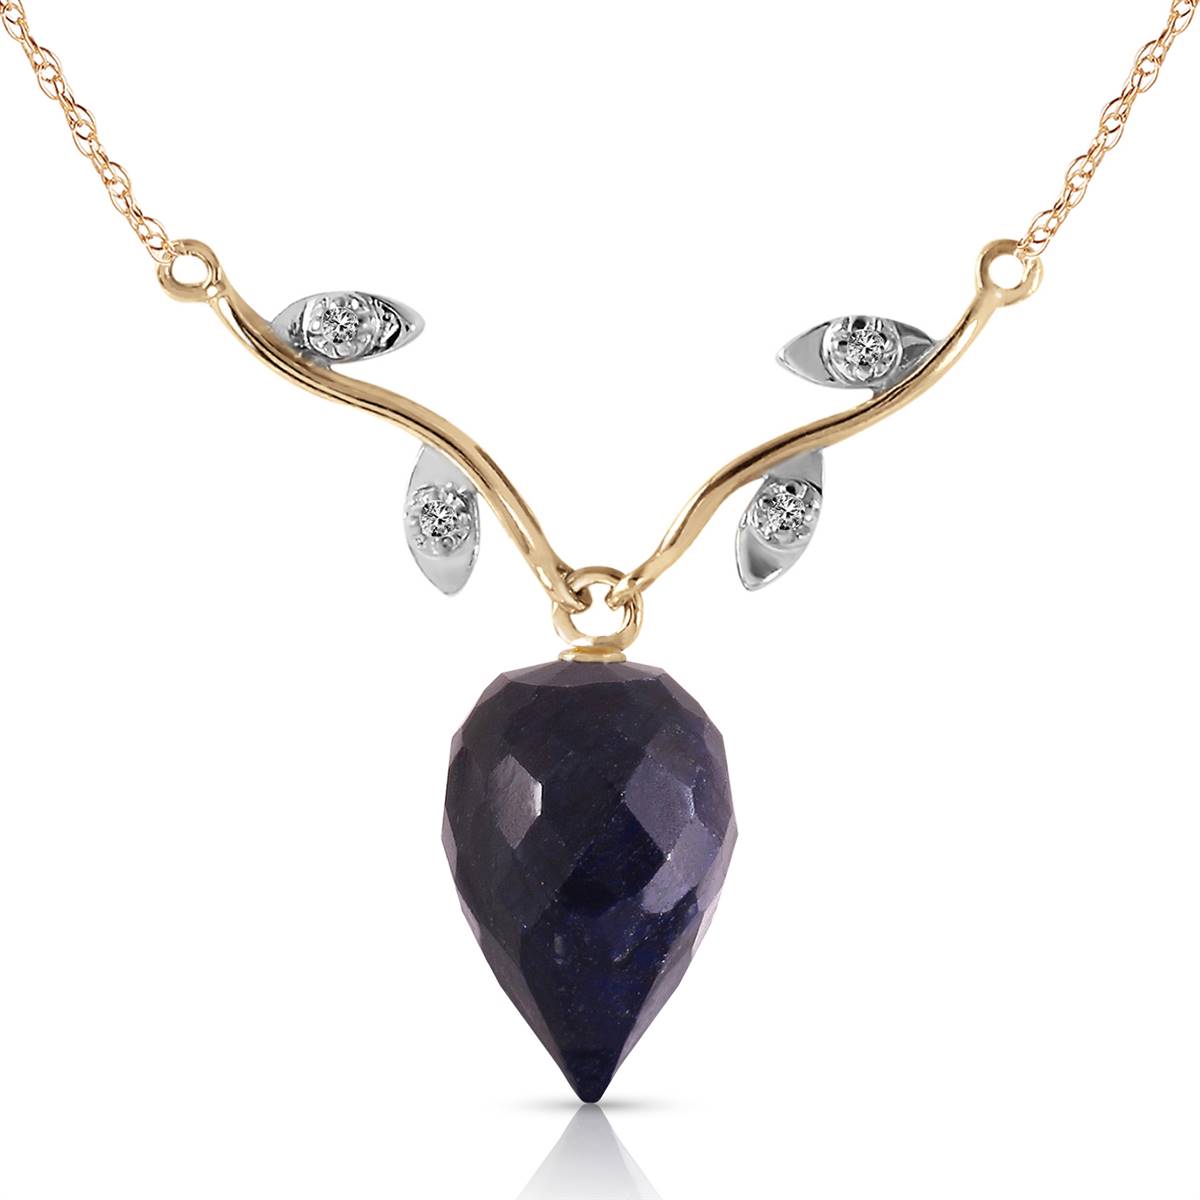 12.92 Carat 14K Solid Gold La Bella Vita Sapphire Diamond Necklace Get this  Genuine Gemstone Fine Jewelry in Solid 14k Gold - MADE IN USA Luxury Gift  Perfect Gift Affordable Price Manufacturers